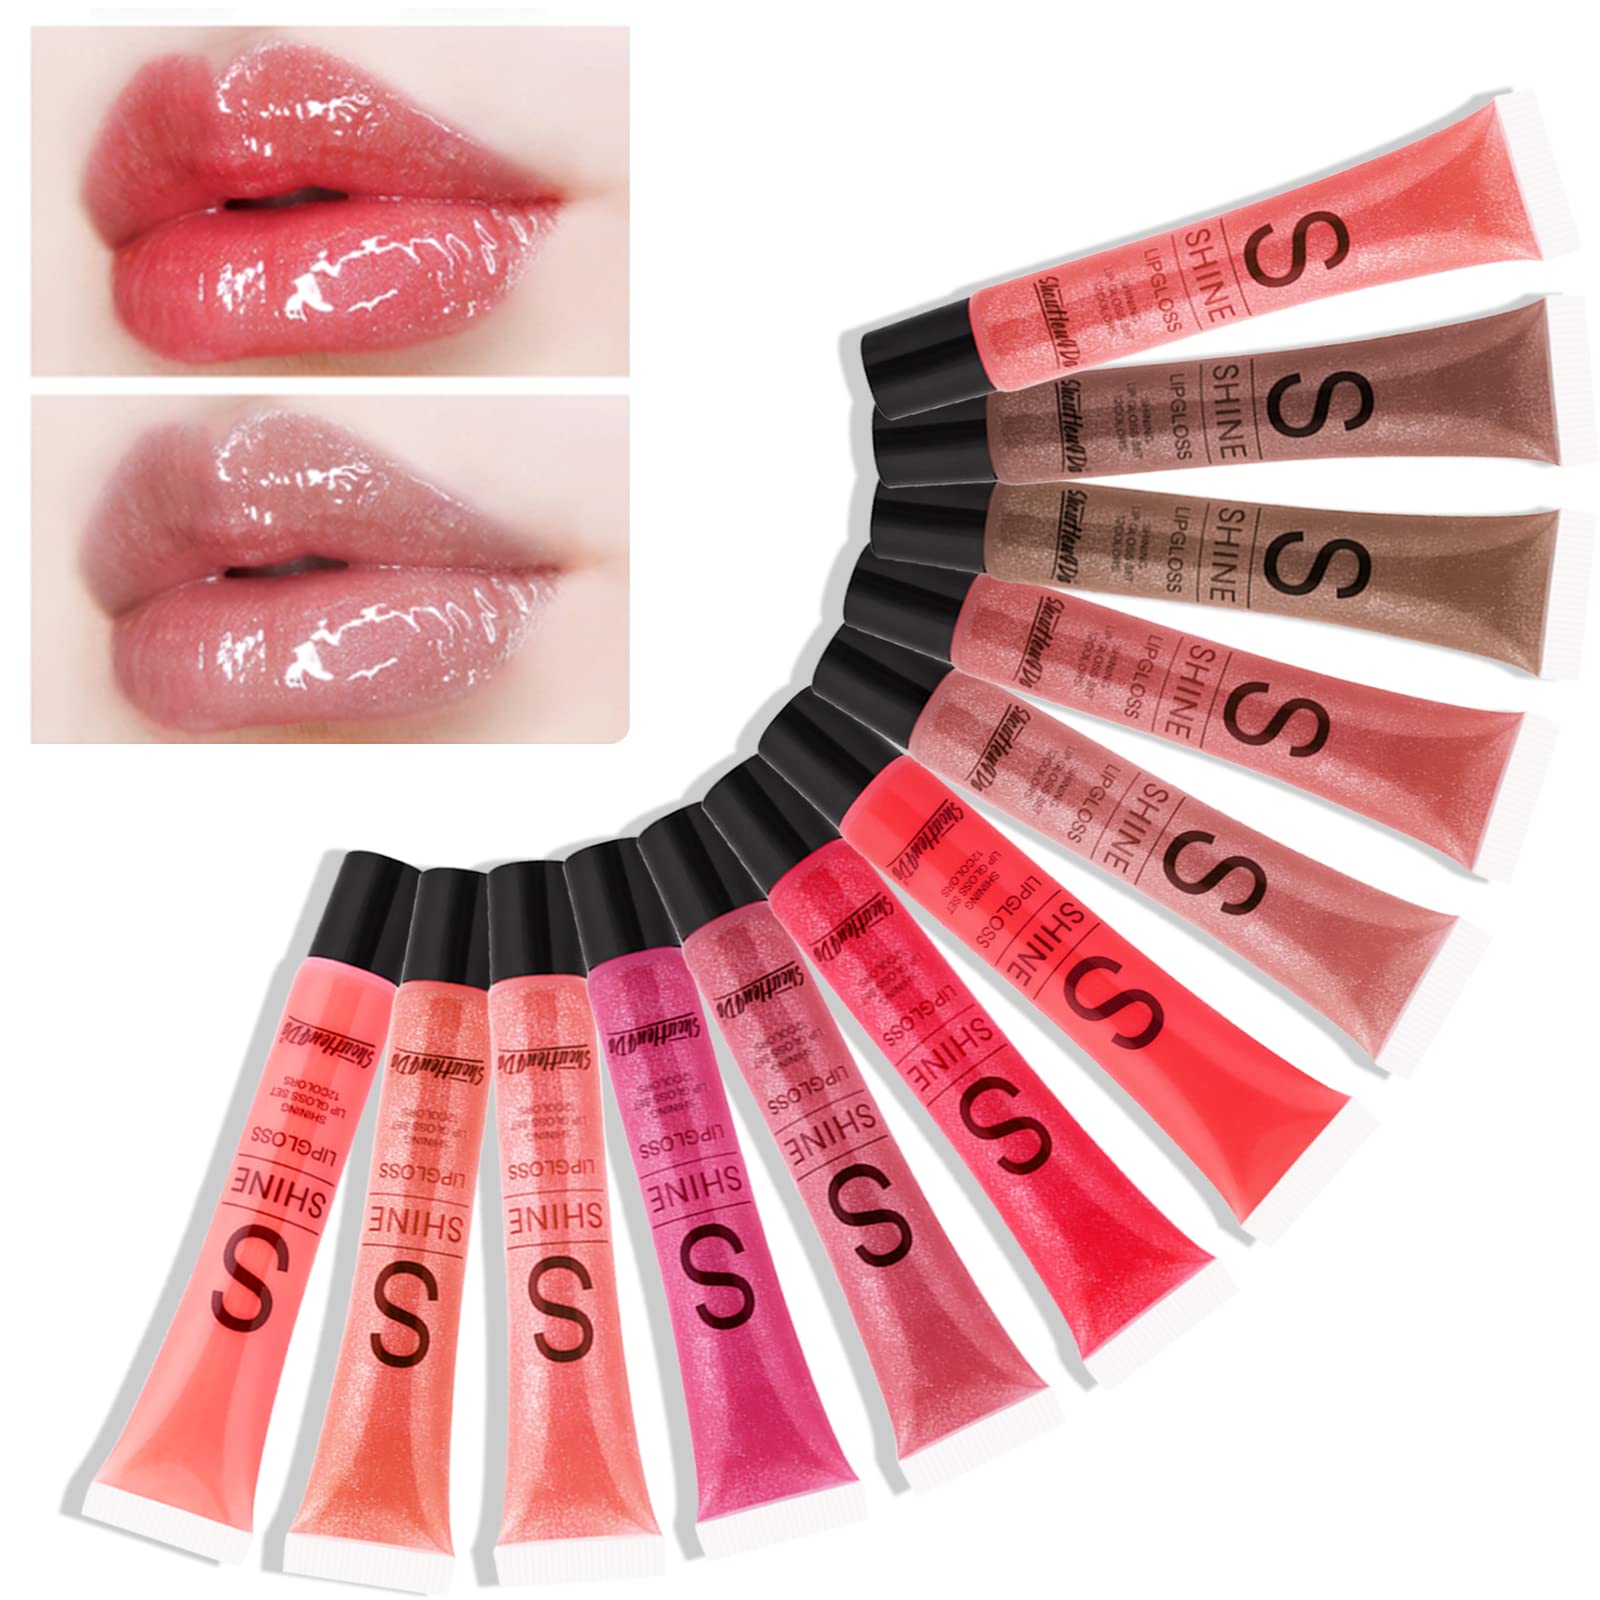 12 Color Lip Gloss Set,12Pc Shimmery Lipgloss Sets for Women and